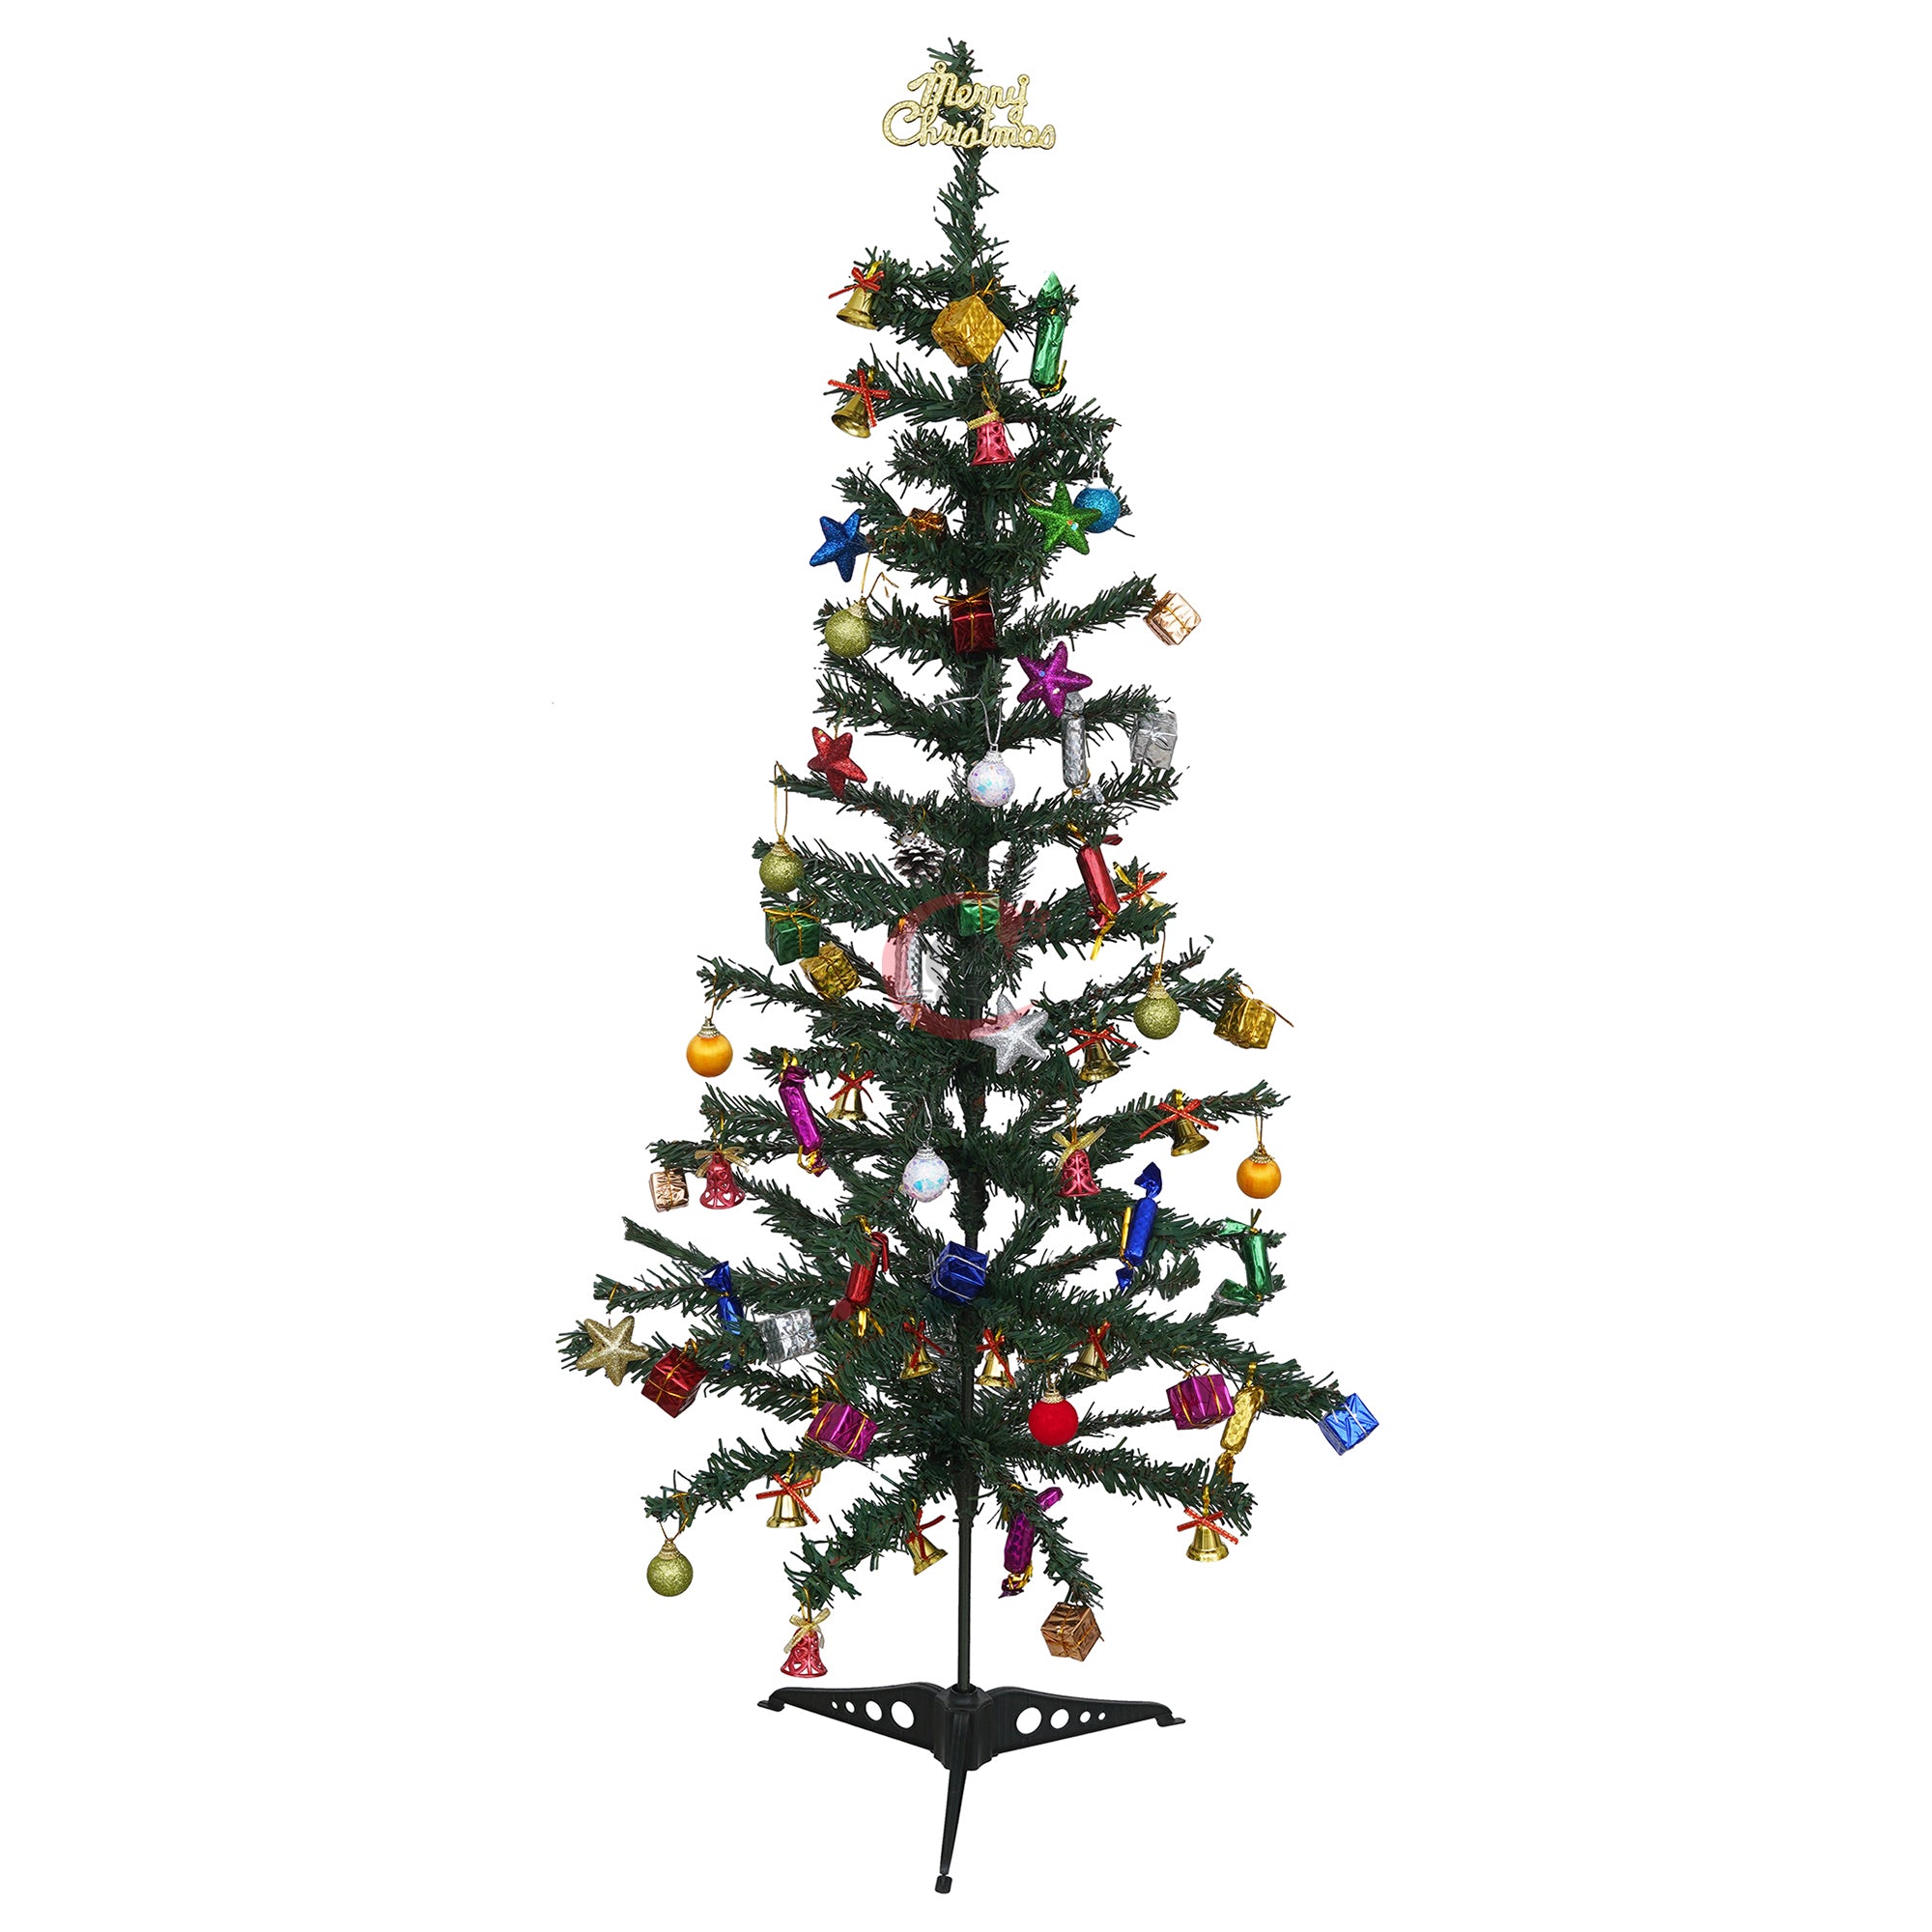 eCraftIndia 3 Feet Green Artificial Christmas Tree Xmas Pine Tree with Stand and 60 Christmas Decoration Ornaments Props - Merry Christmas Decoration Item for Home, Office, and Church 4